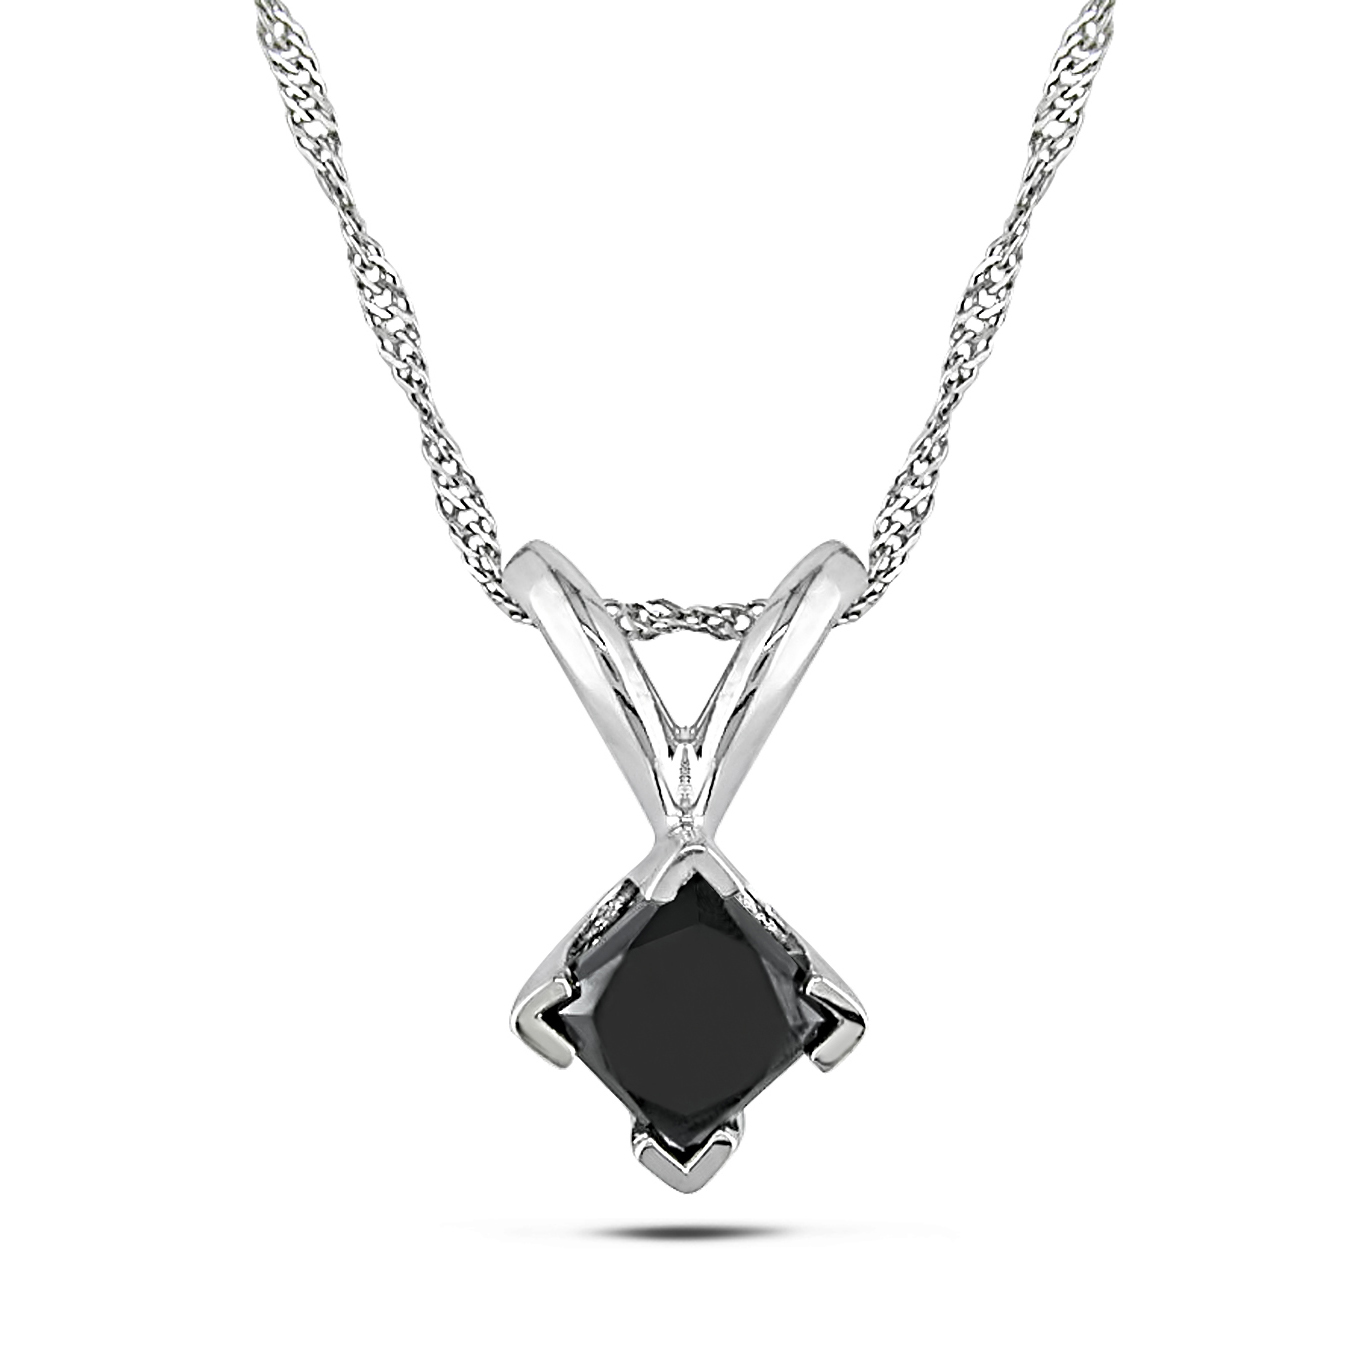 1/2 CT TW Black Princess Cut Diamond Solitaire Pendant with Chain in 14k White Gold